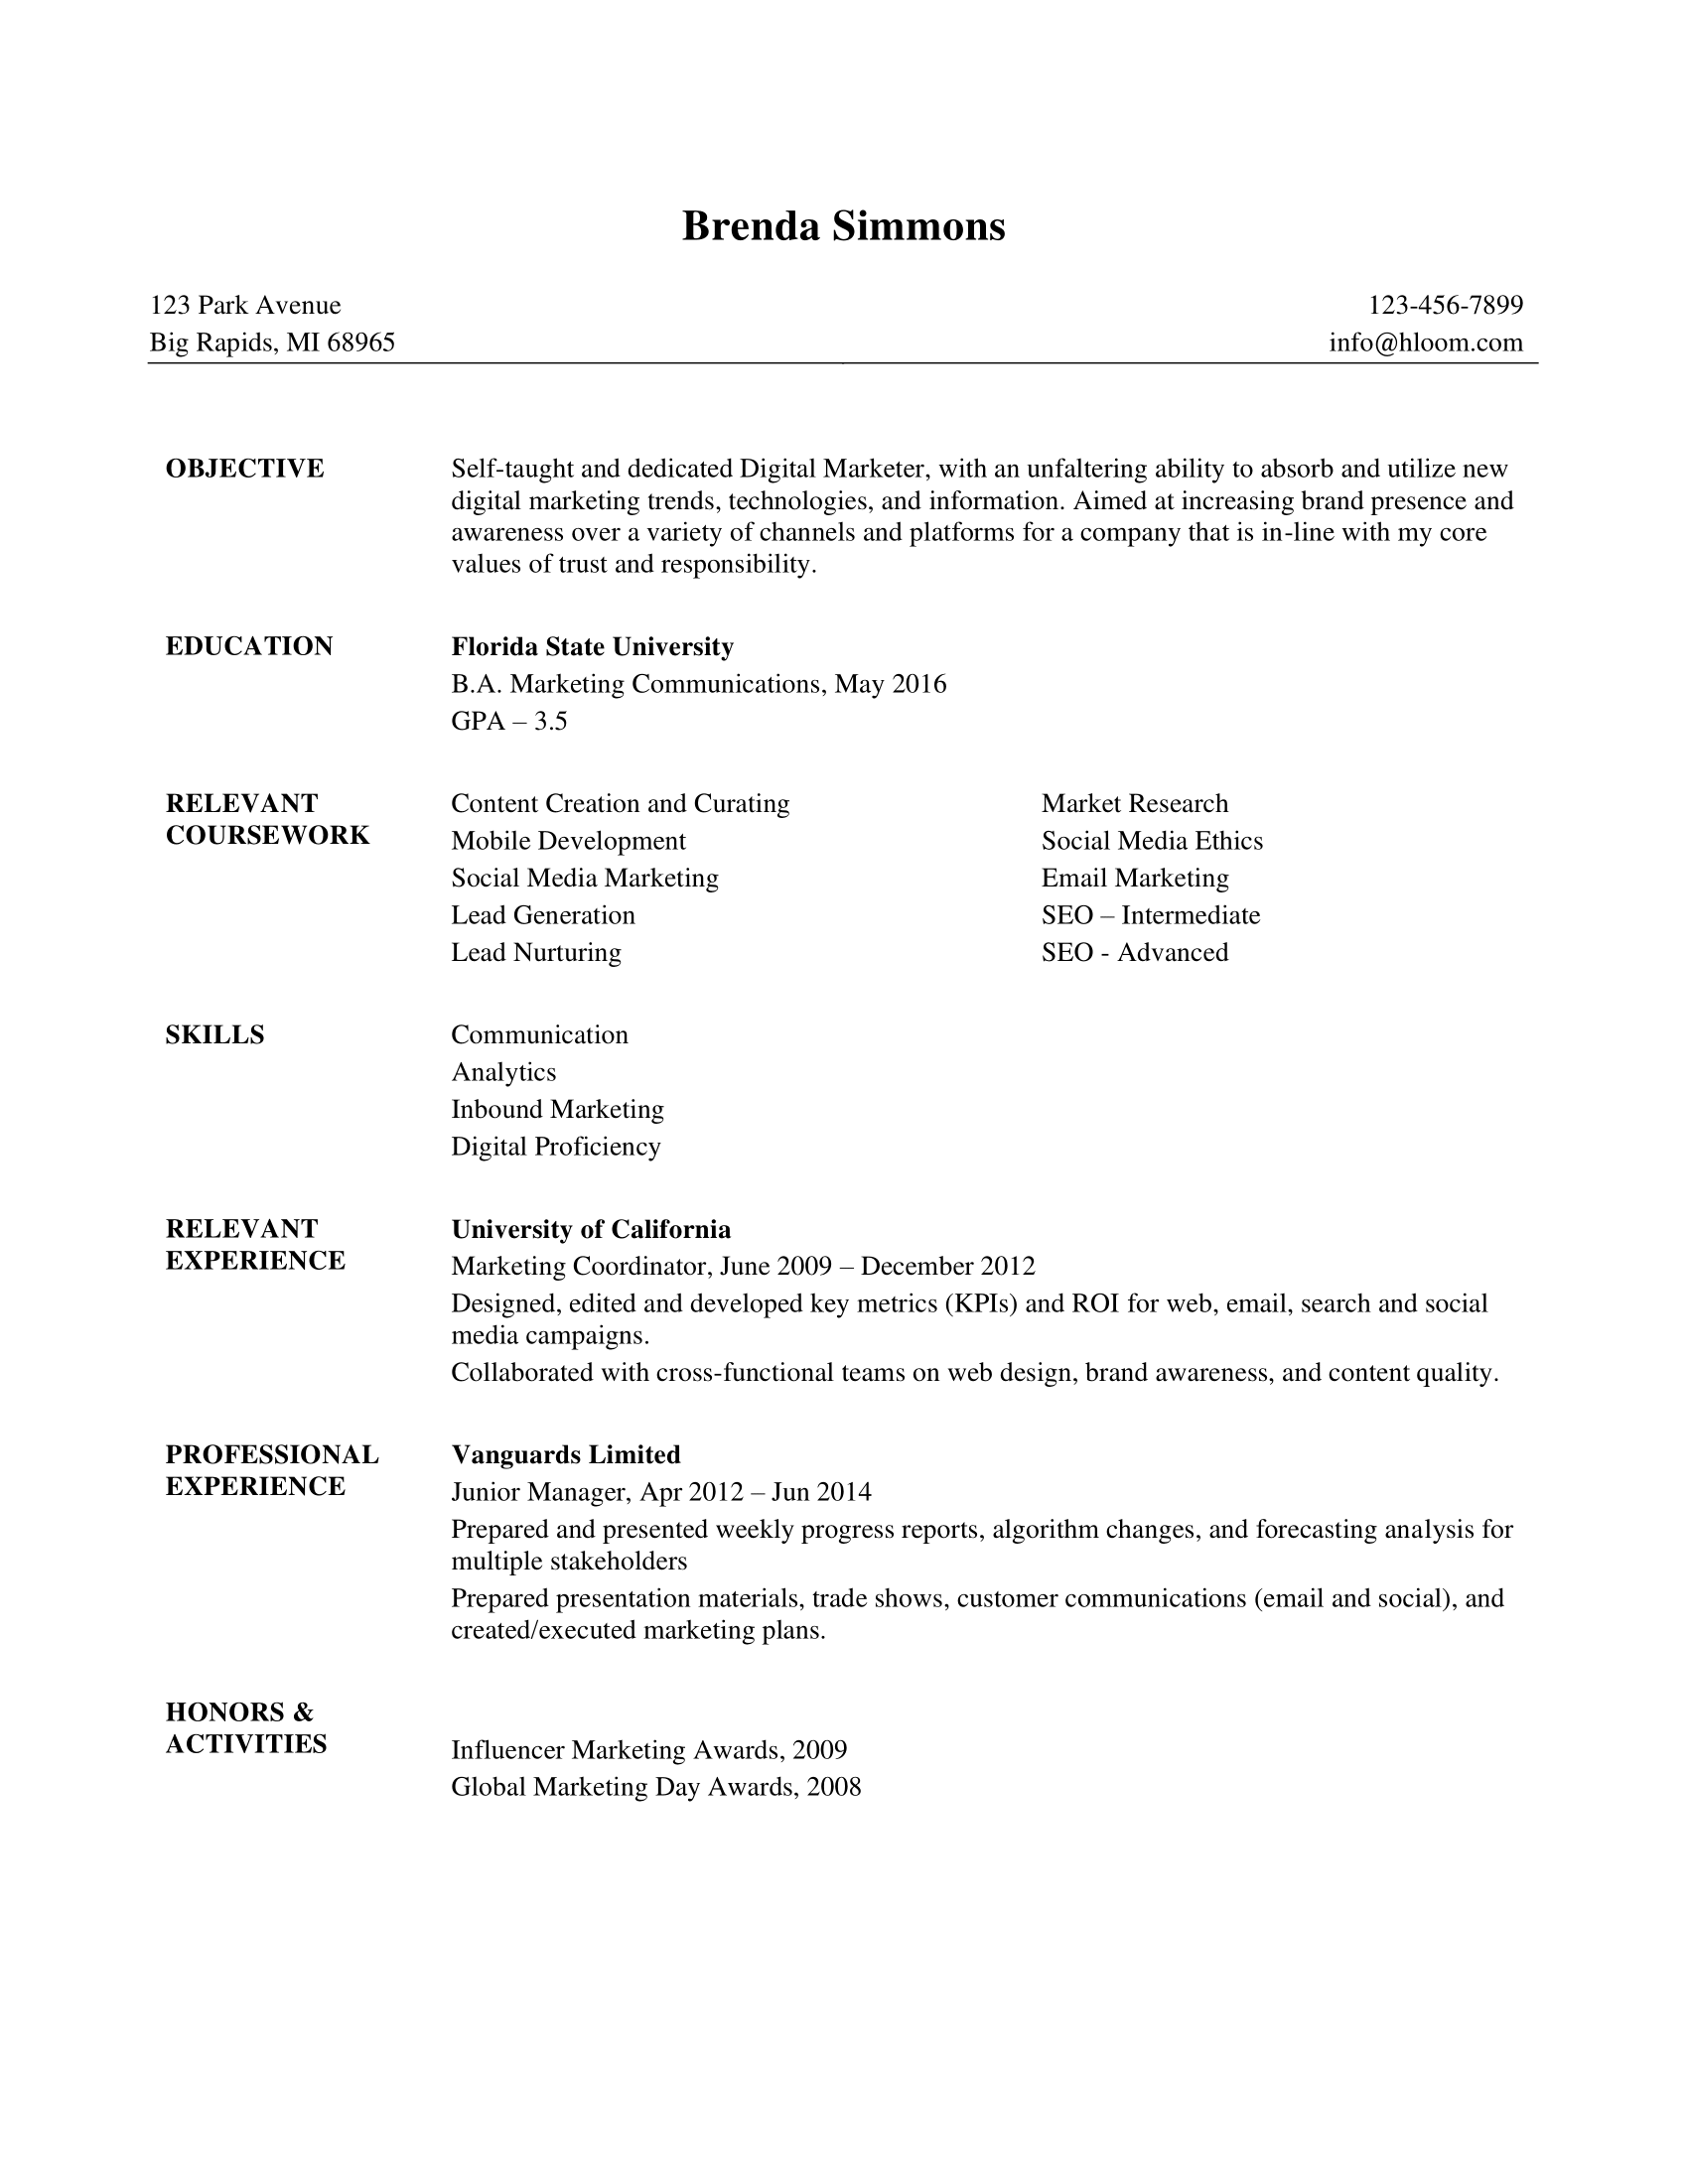 resume example for intern